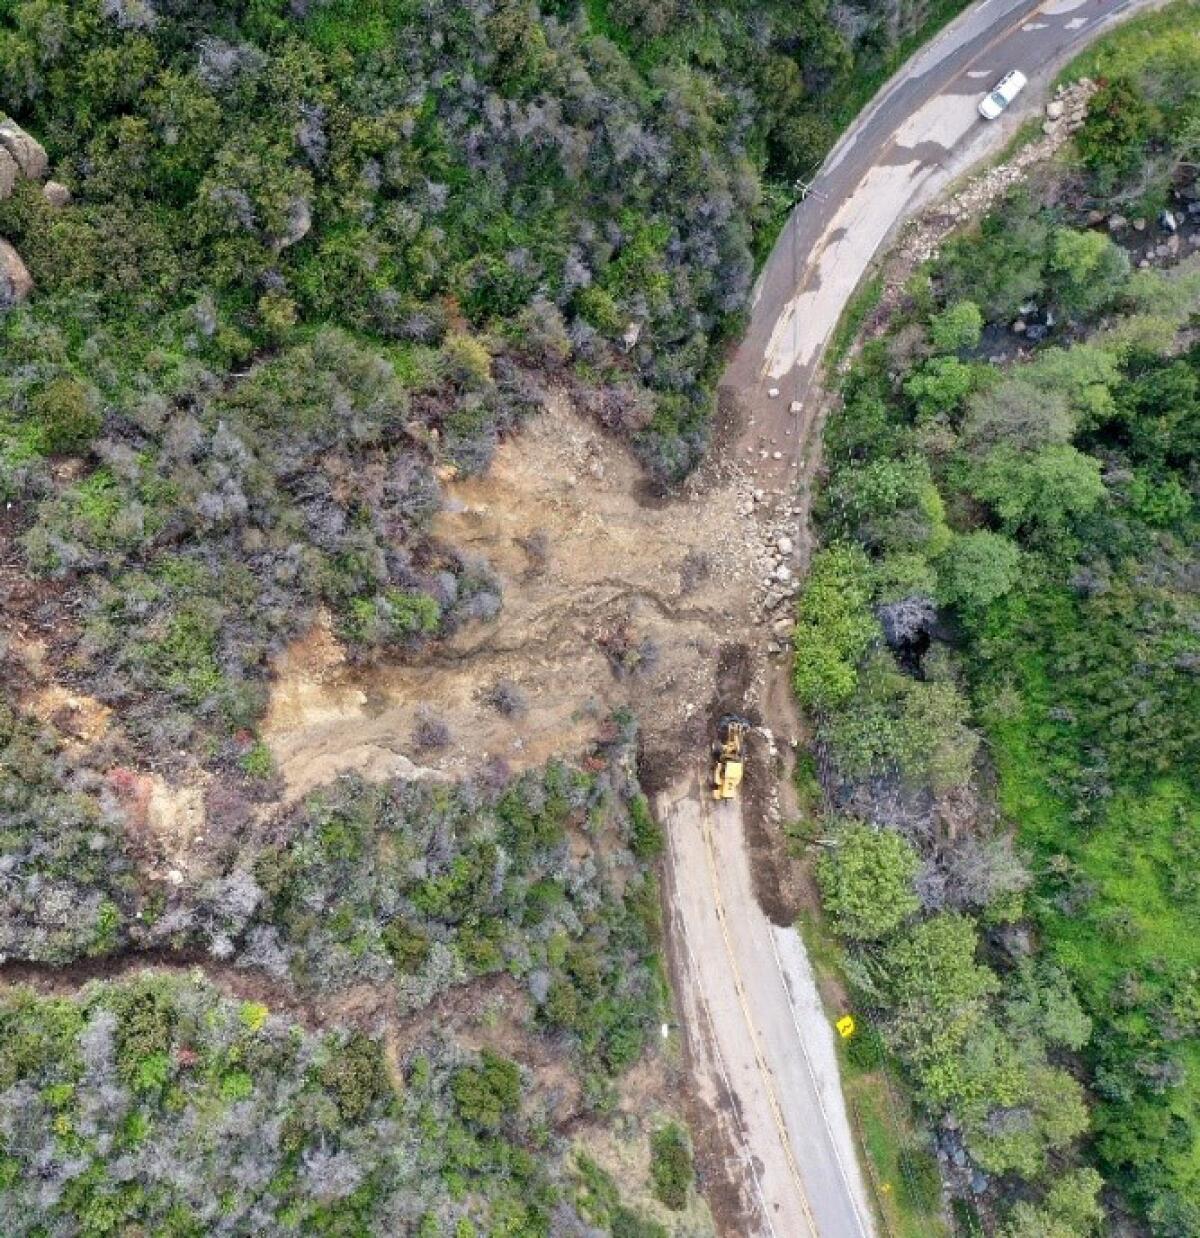 An aerial view of the Topanga Canyon Road landslide 